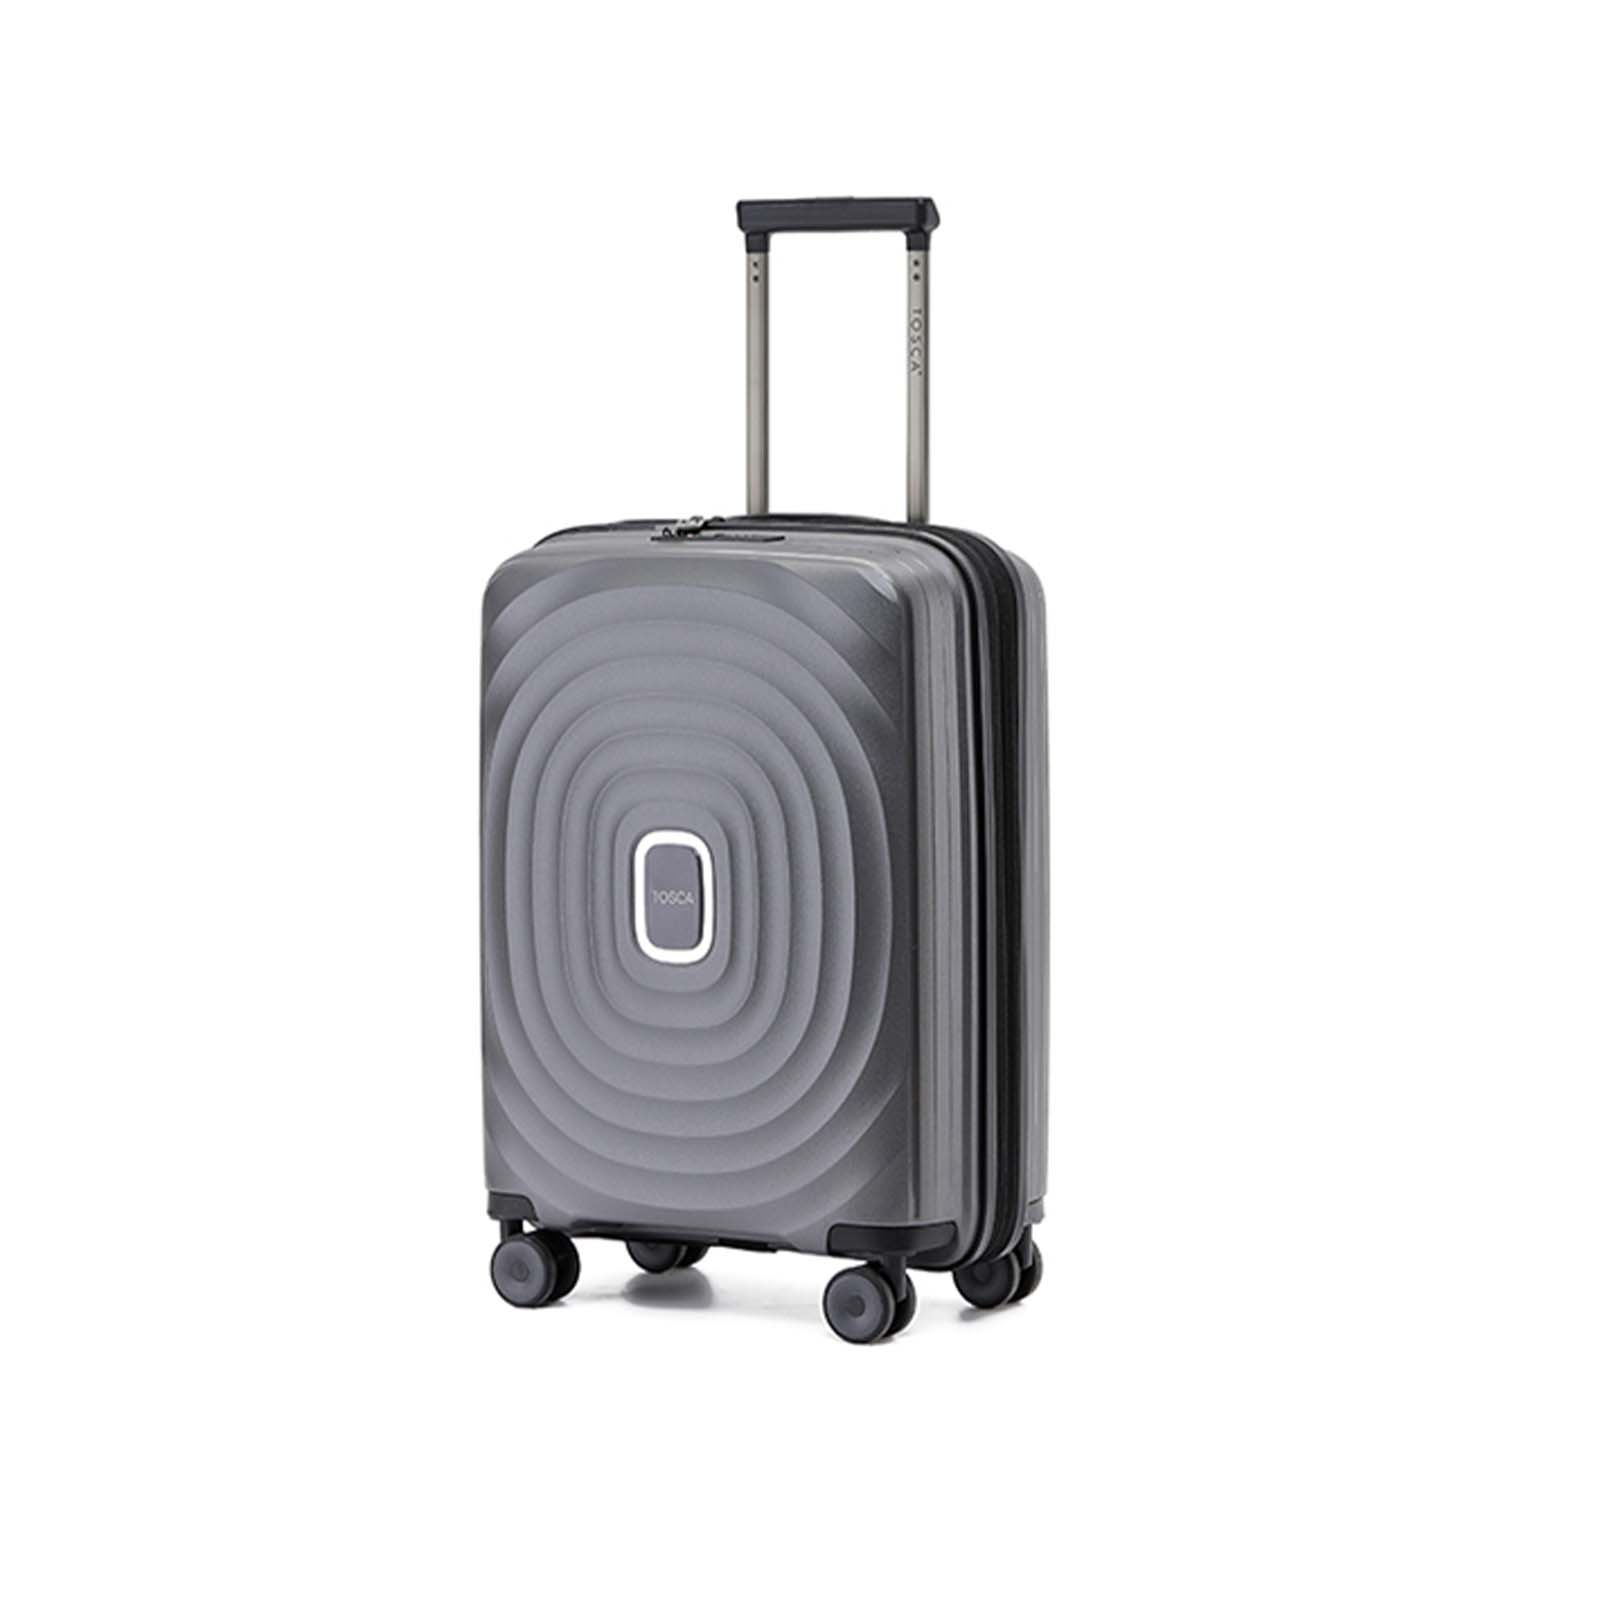 tosca-eclipse-4-wheel-55cm-carry-on-suitcase-charcoal-front-angle